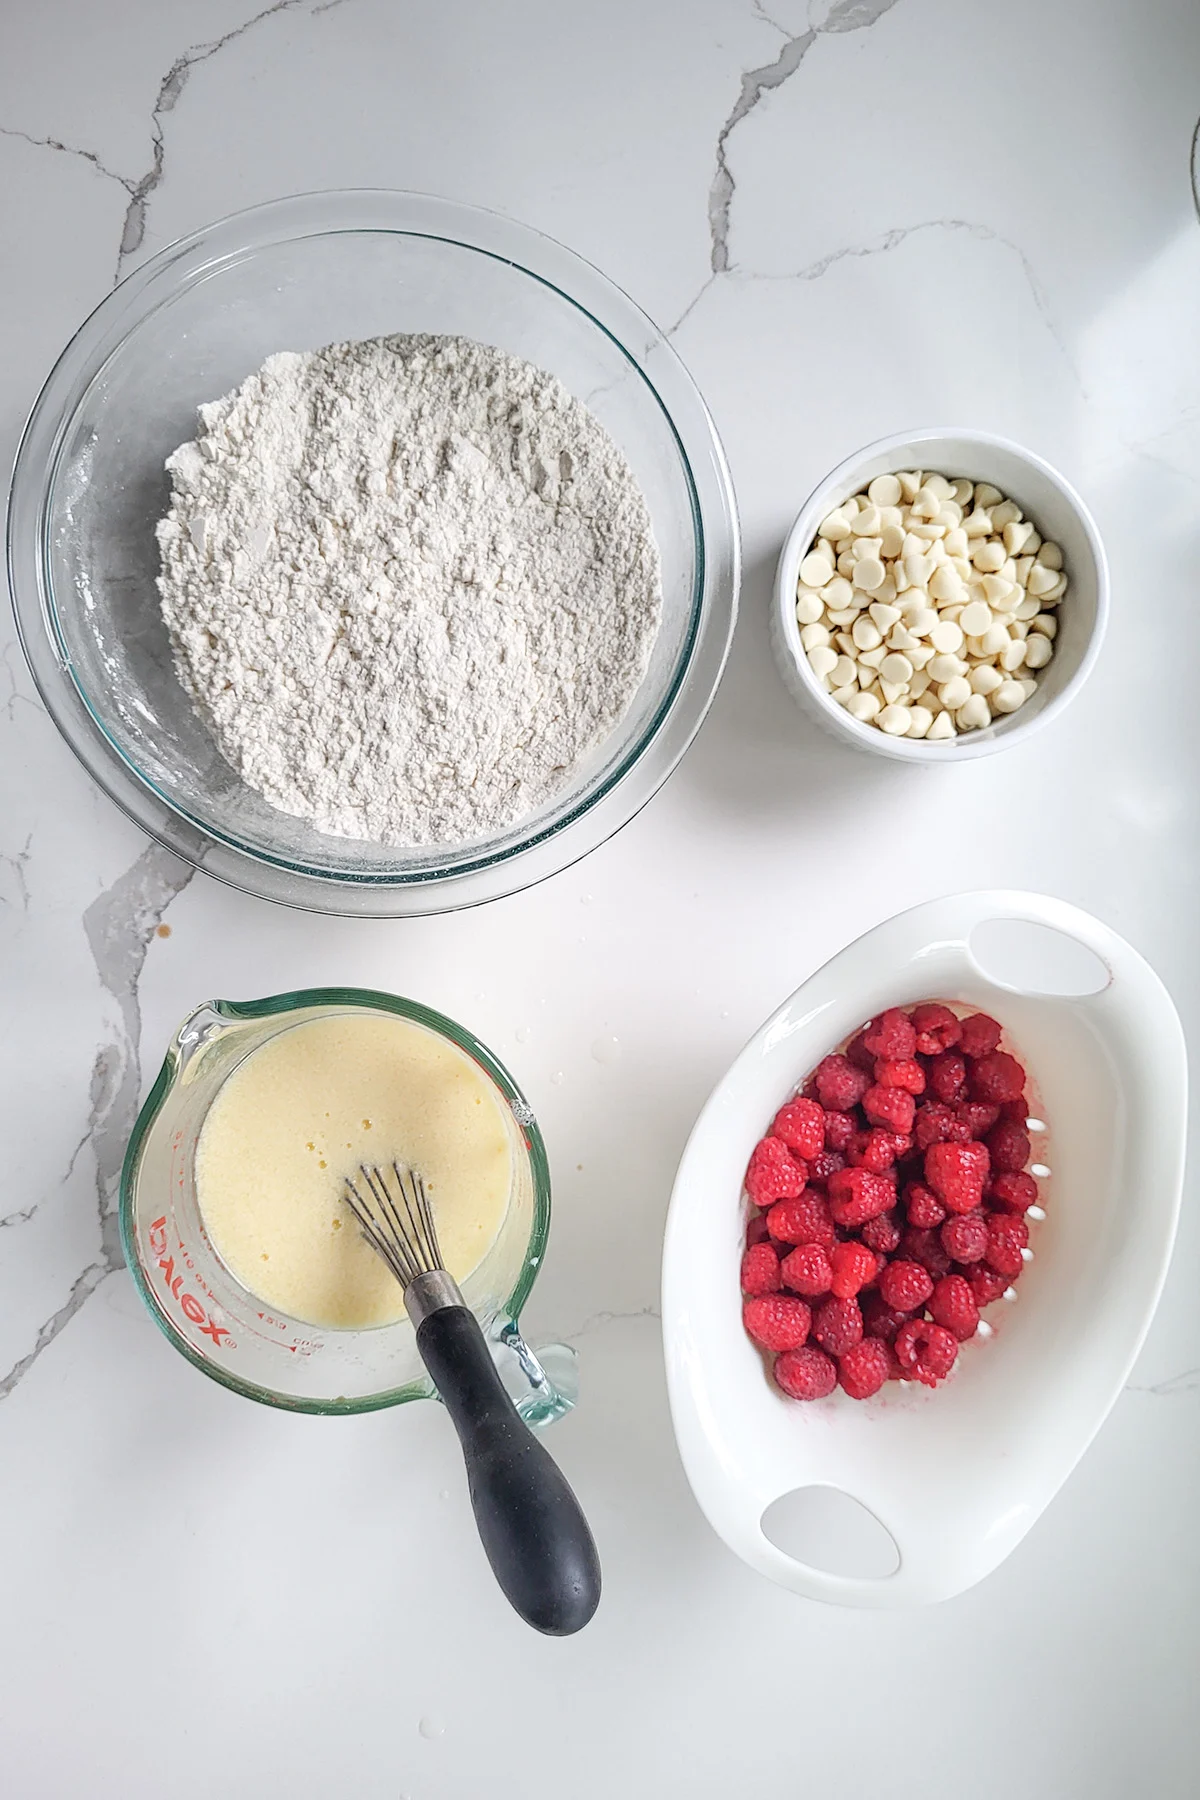 A bowl of flour, a cup with milk and eggs, a bowl of white chocolate chips and a basket of raspberries.